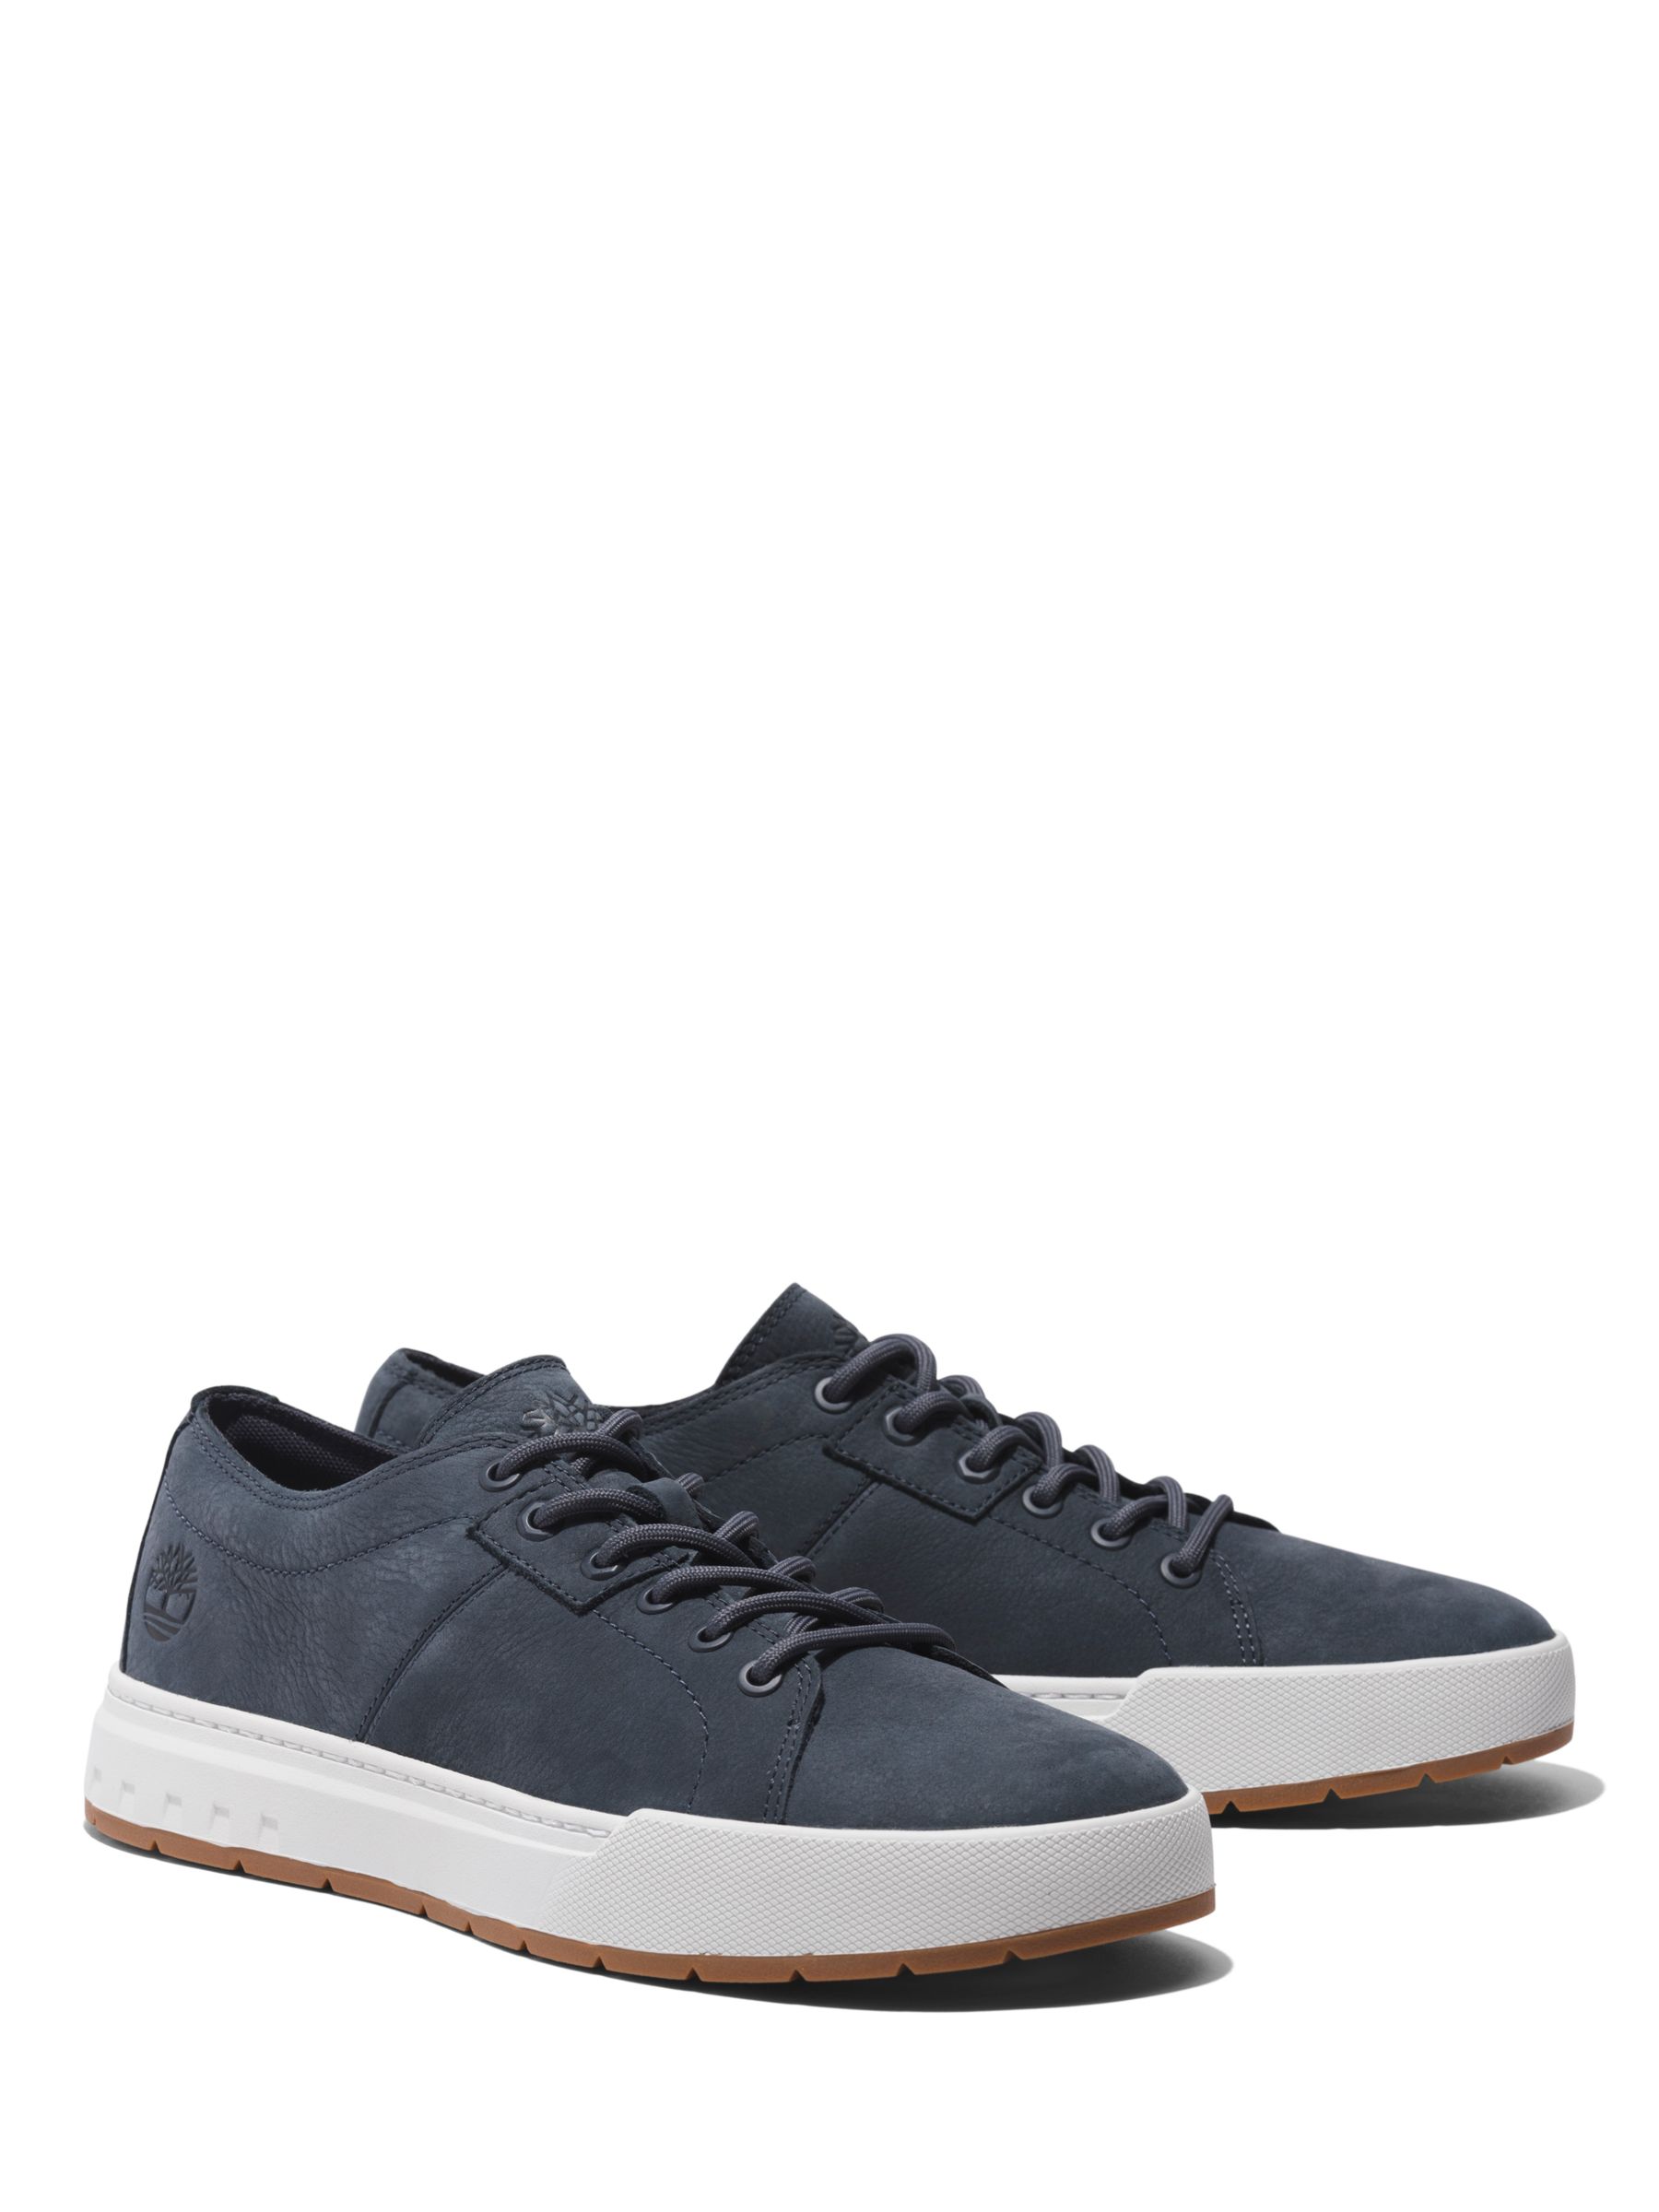 Timberland Maple Grove Low Top Leather Trainers, Navy, 8